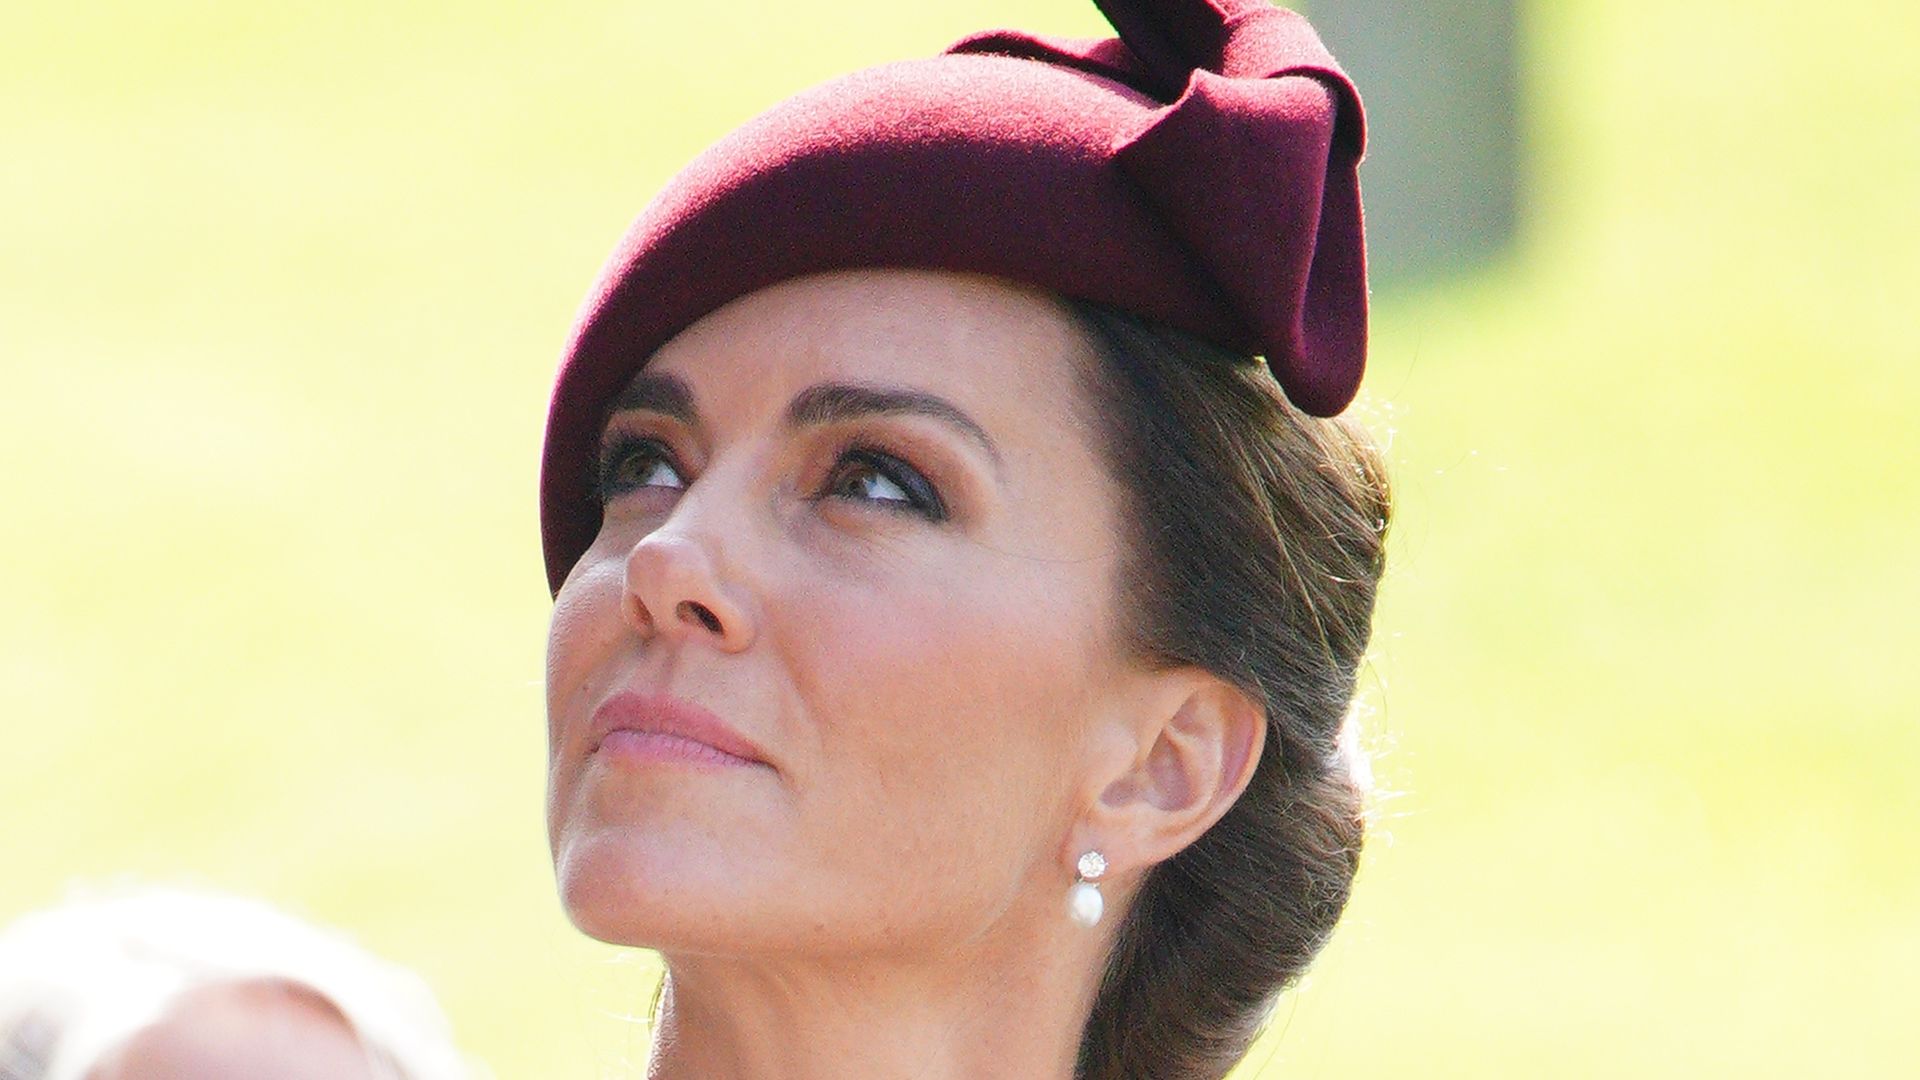 Kate wore muted maroon